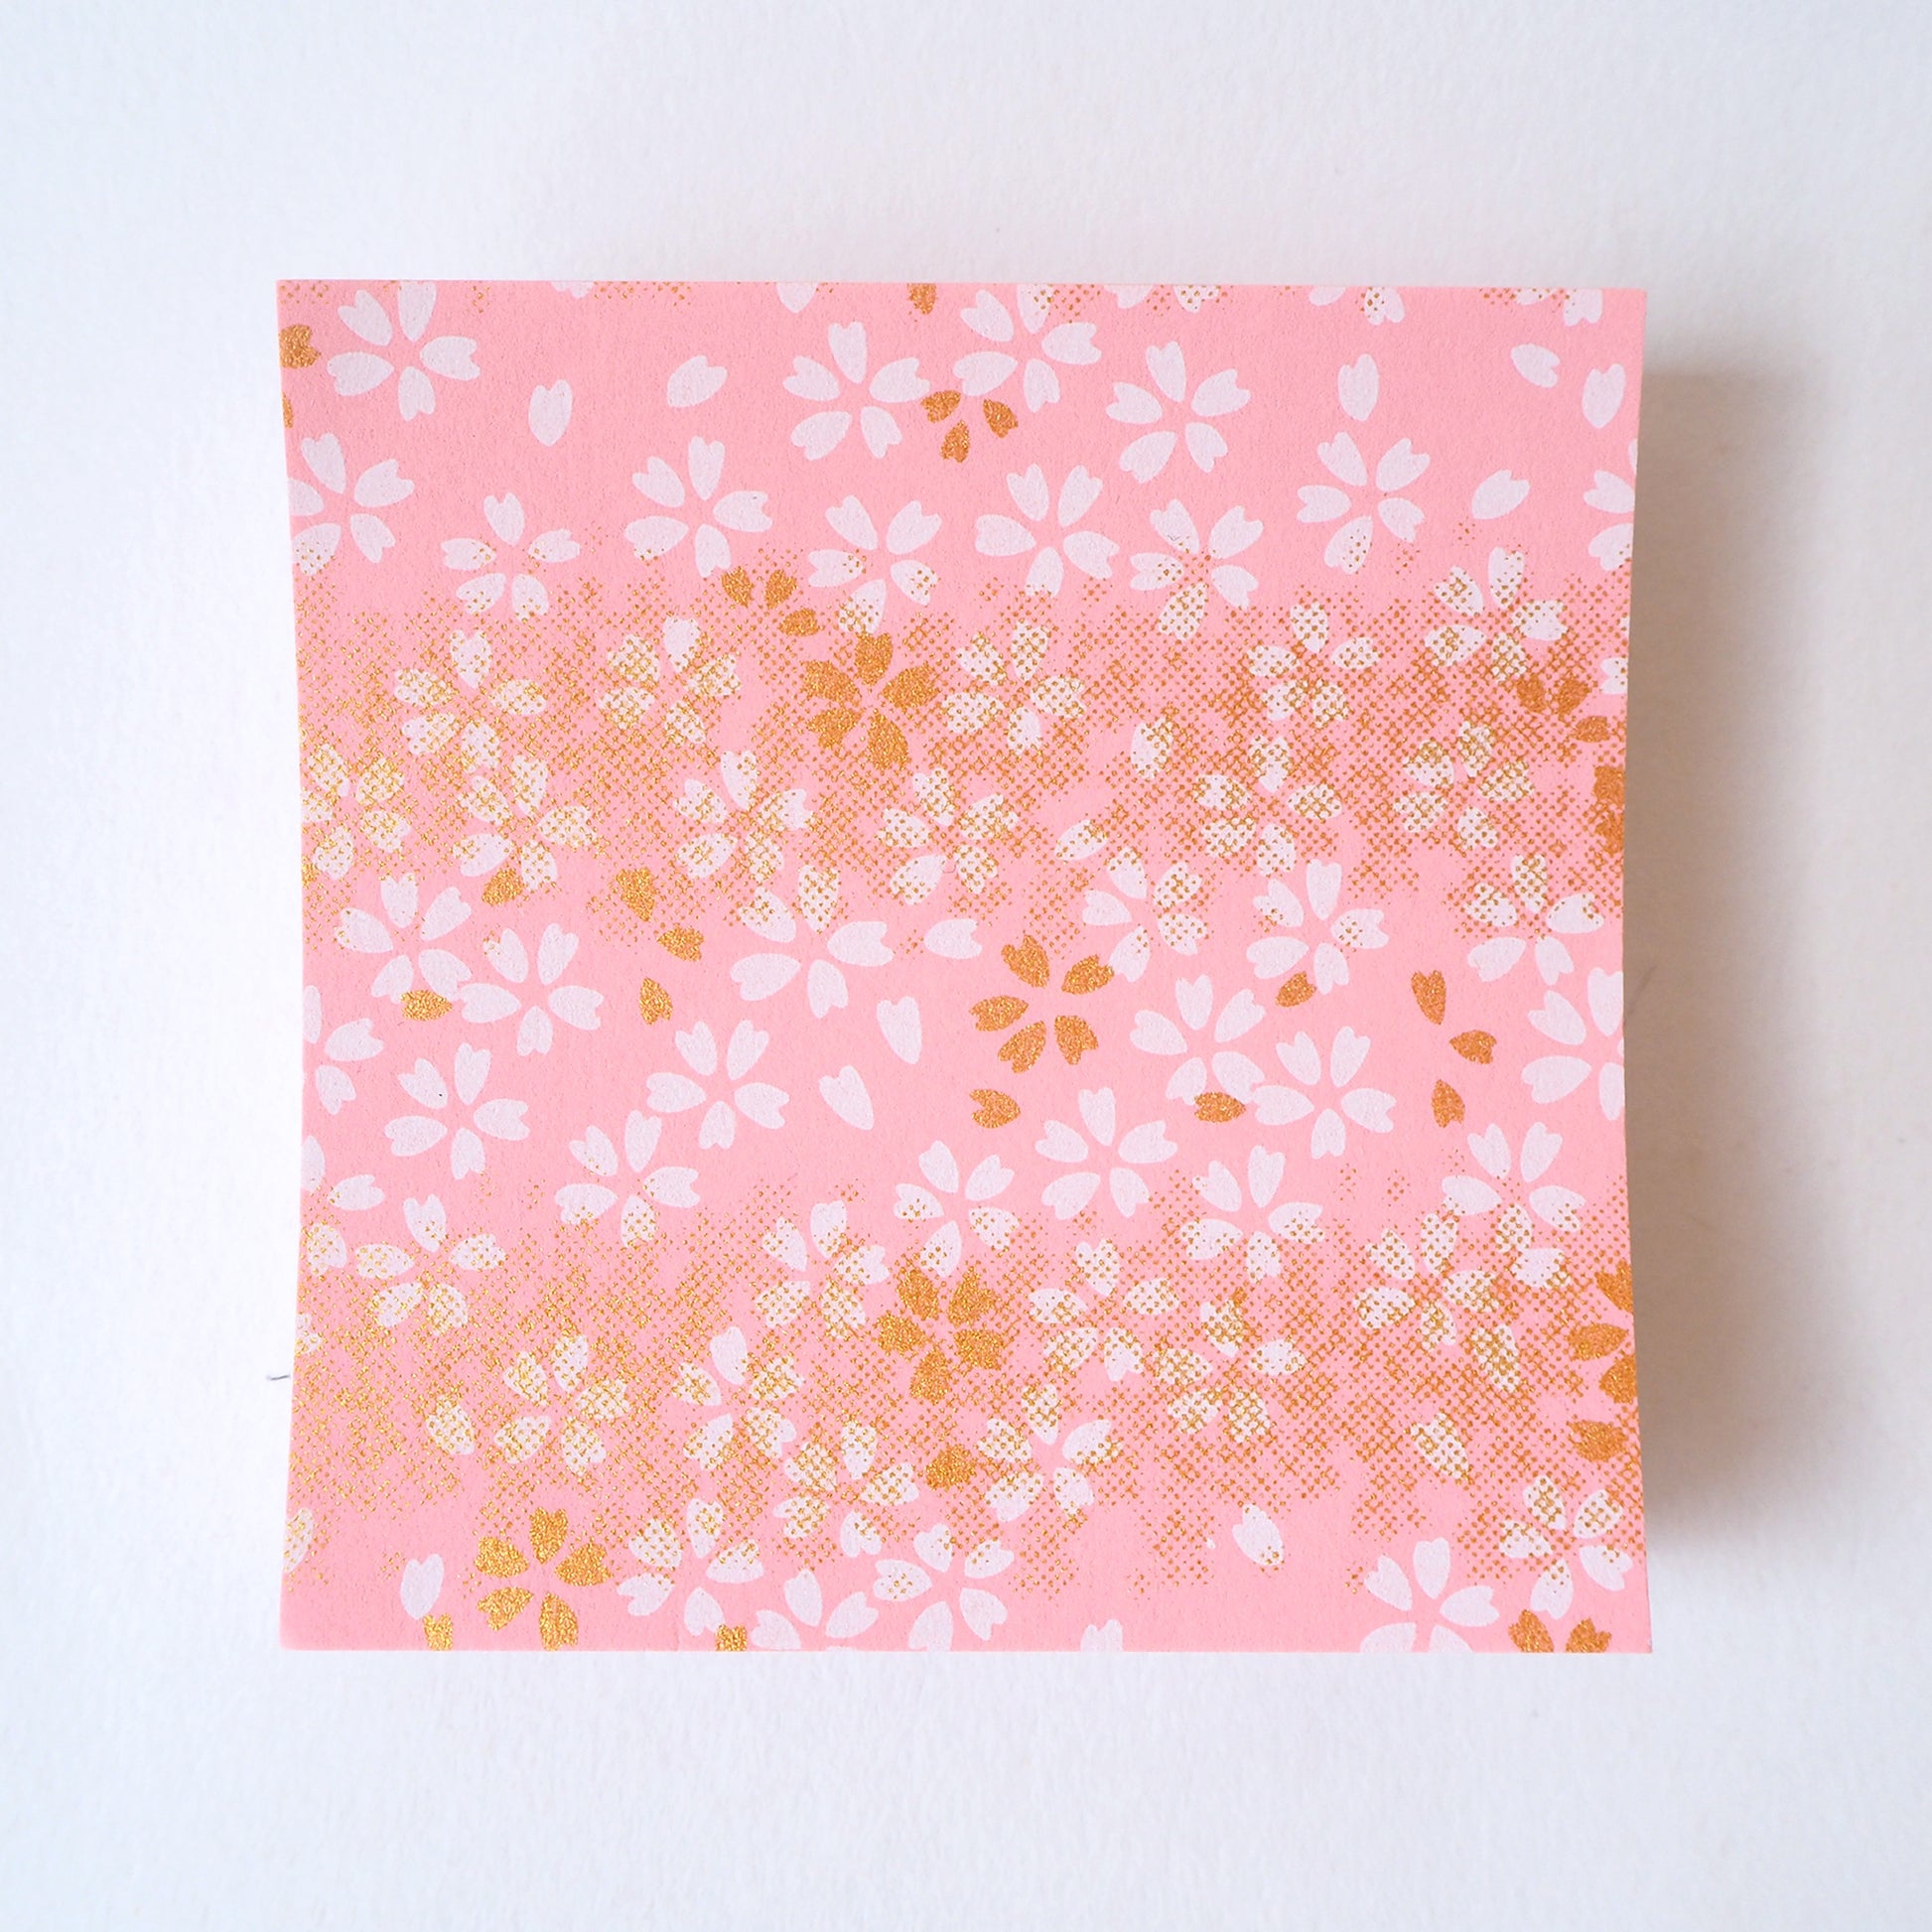 Pack of 100 Sheets 7x7cm Yuzen Washi Origami Paper HZ-128 - Cherry Blossom Pink - washi paper - Lavender Home London